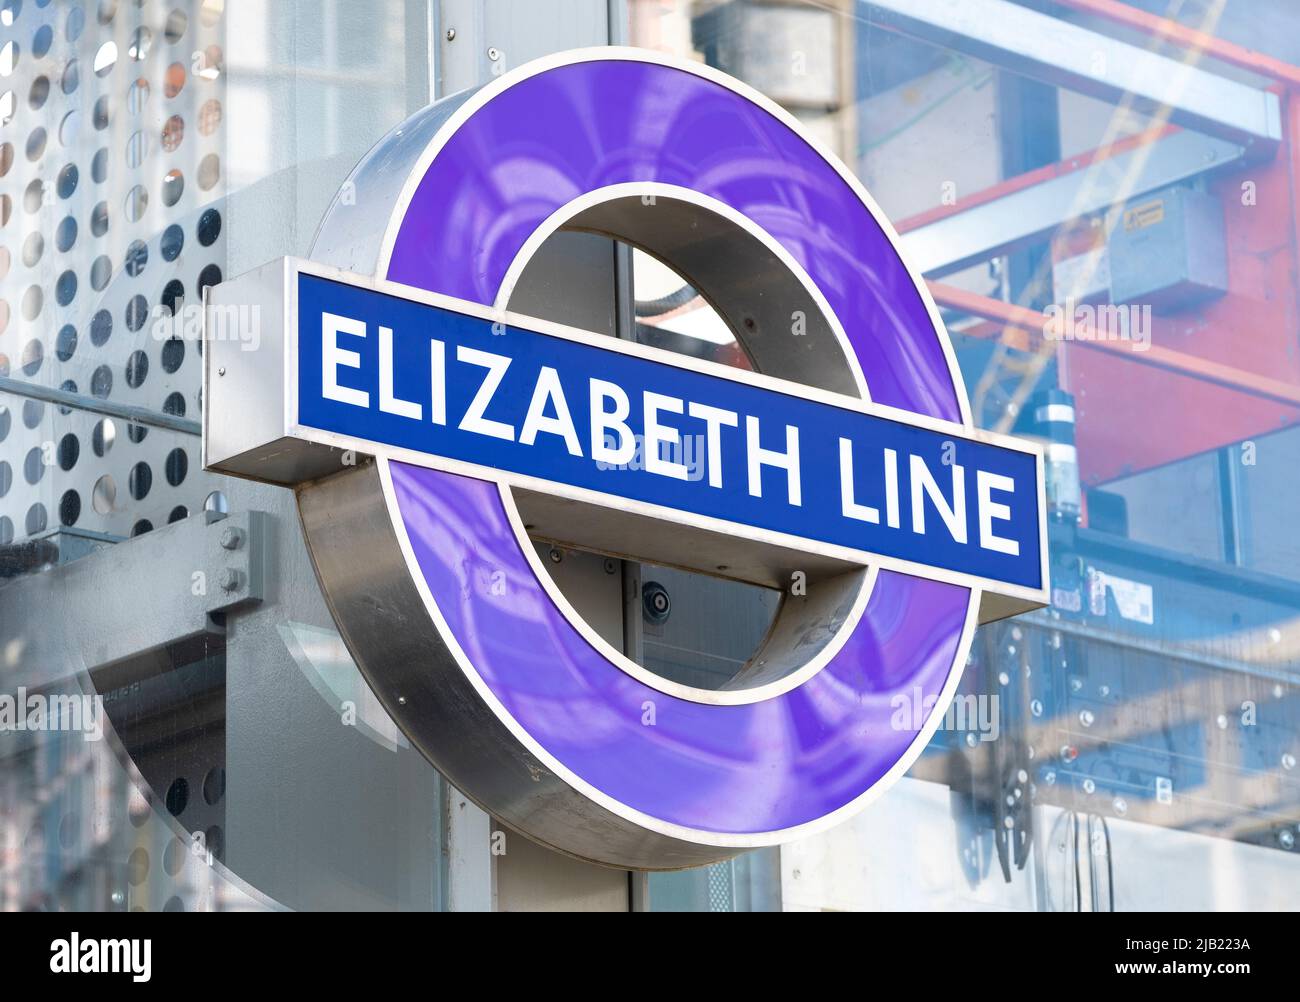 Iconic London Underground tube station sign for the Elizabeth Line at Abbey Wood, which opened as Queen Elizabeth II celebrates her Platinum Jubilee. Stock Photo